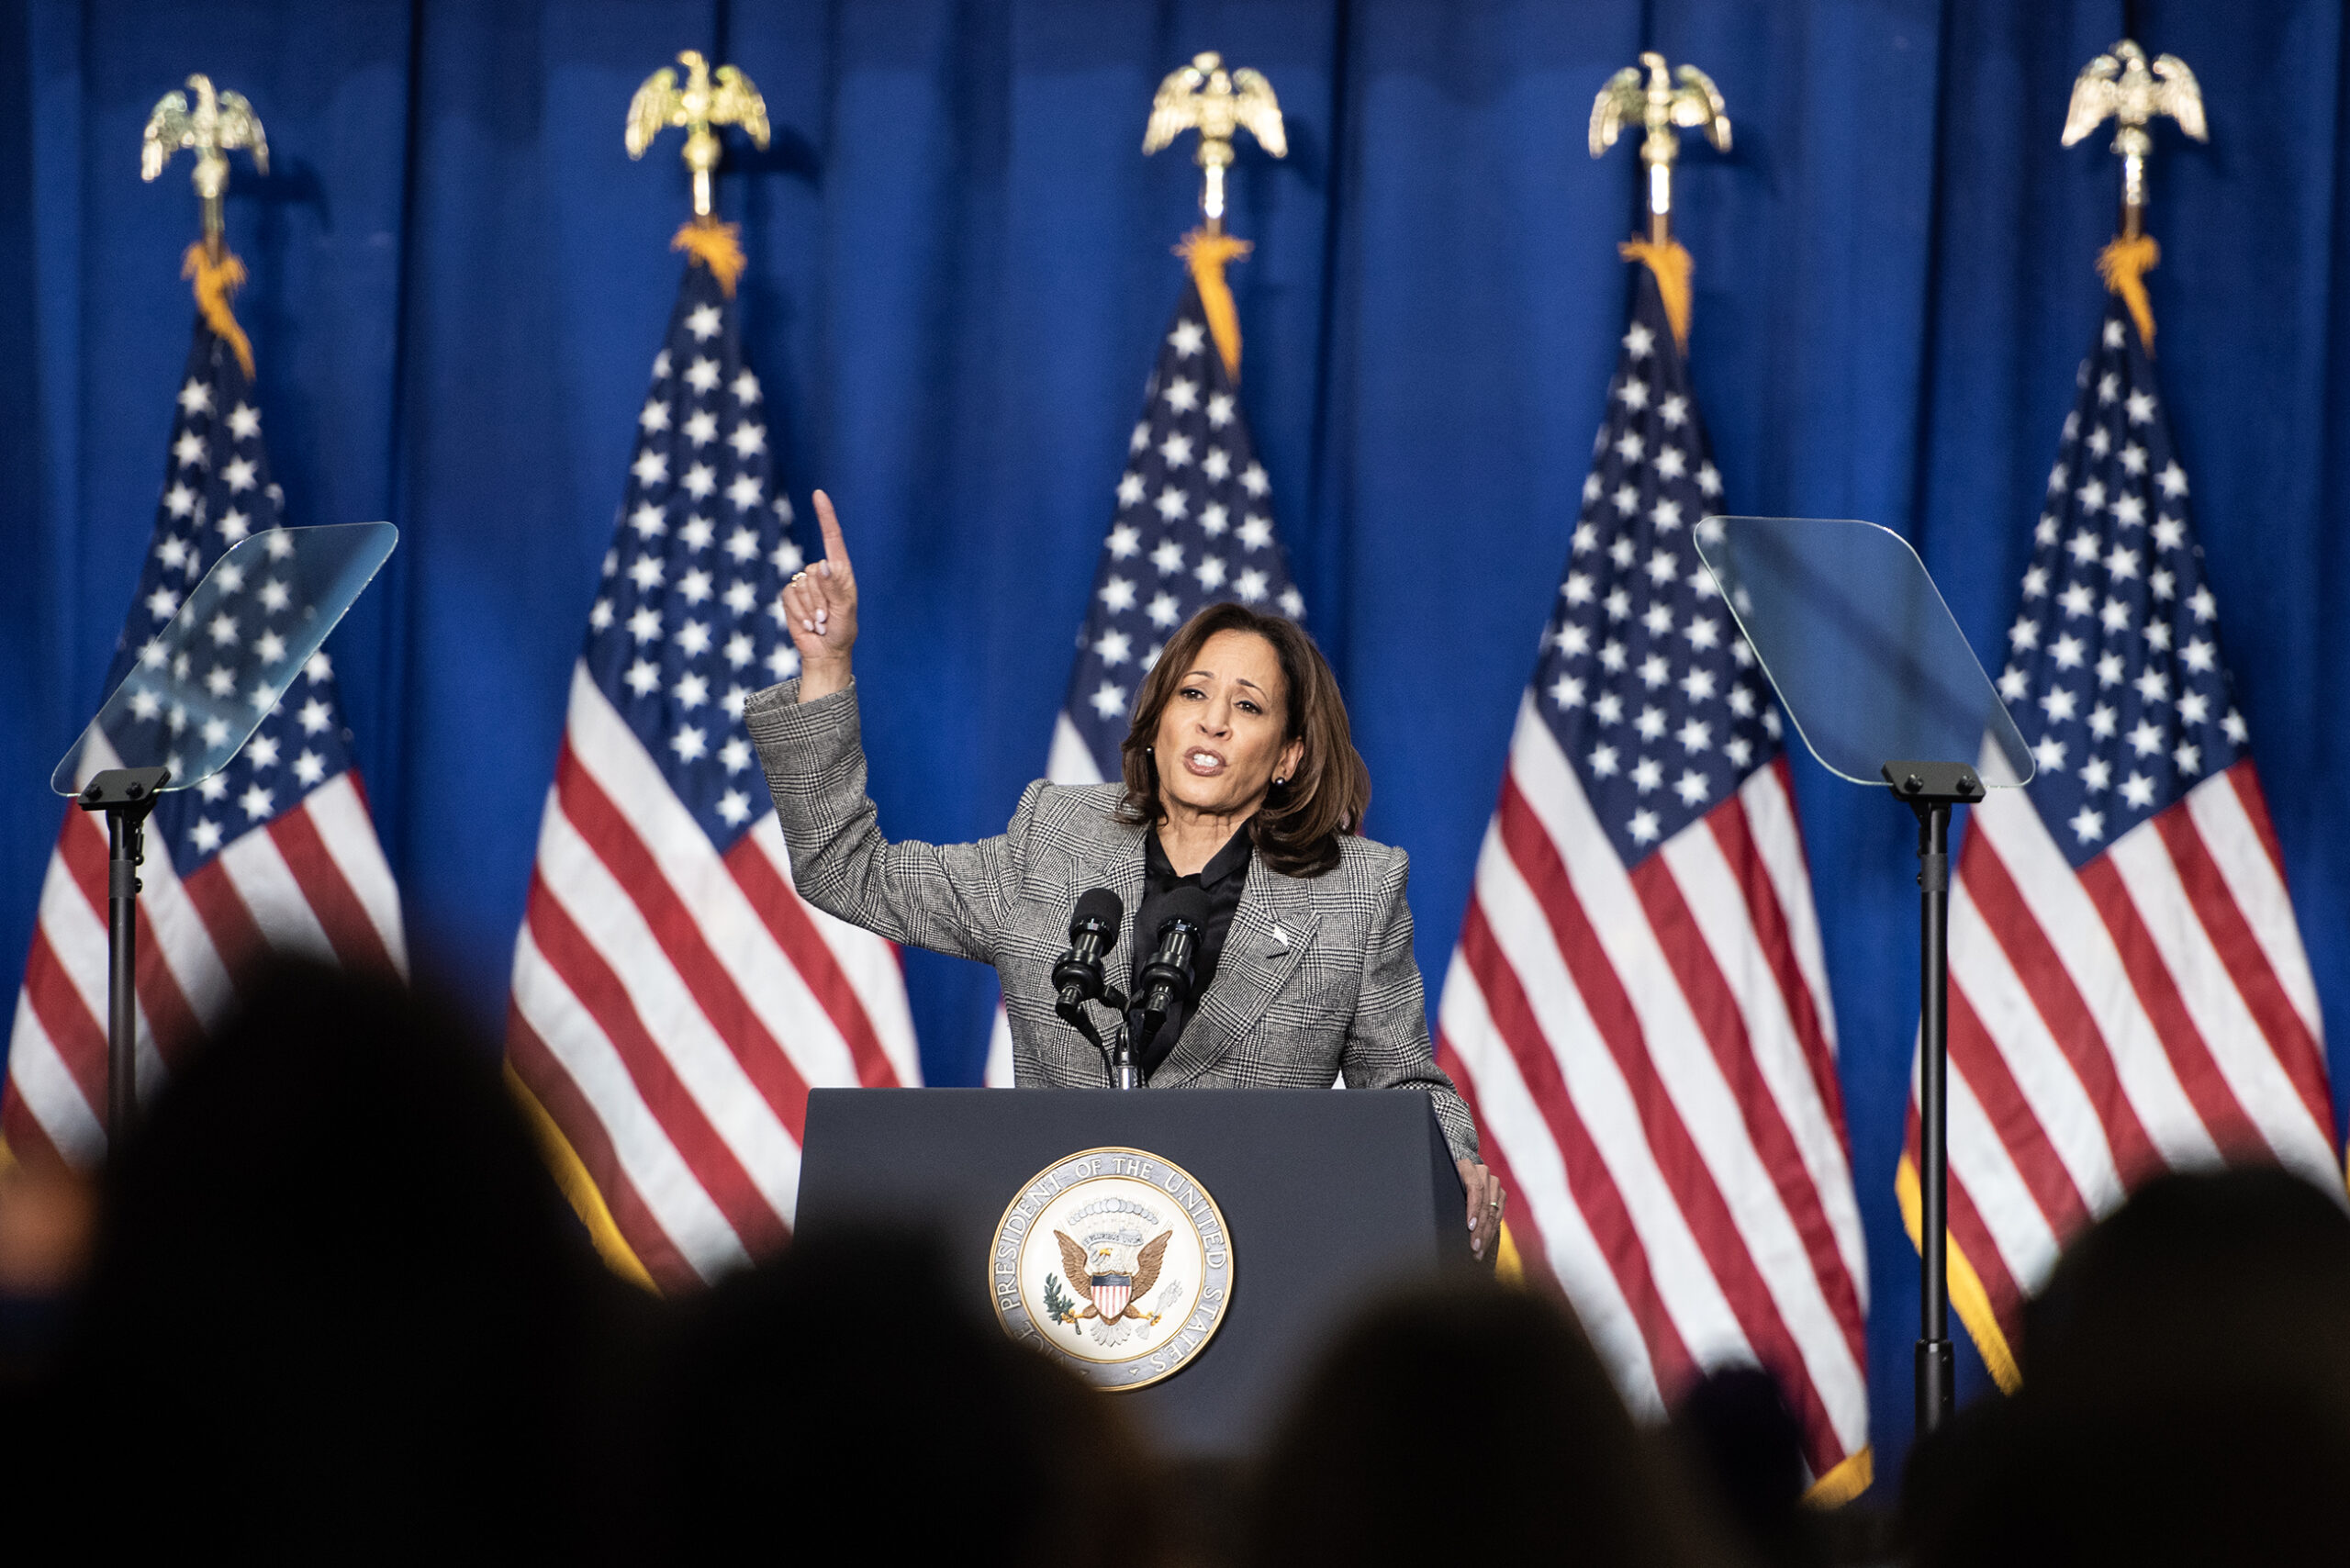 VP Harris points upward during a speech. Five US flags can be seen behind her.